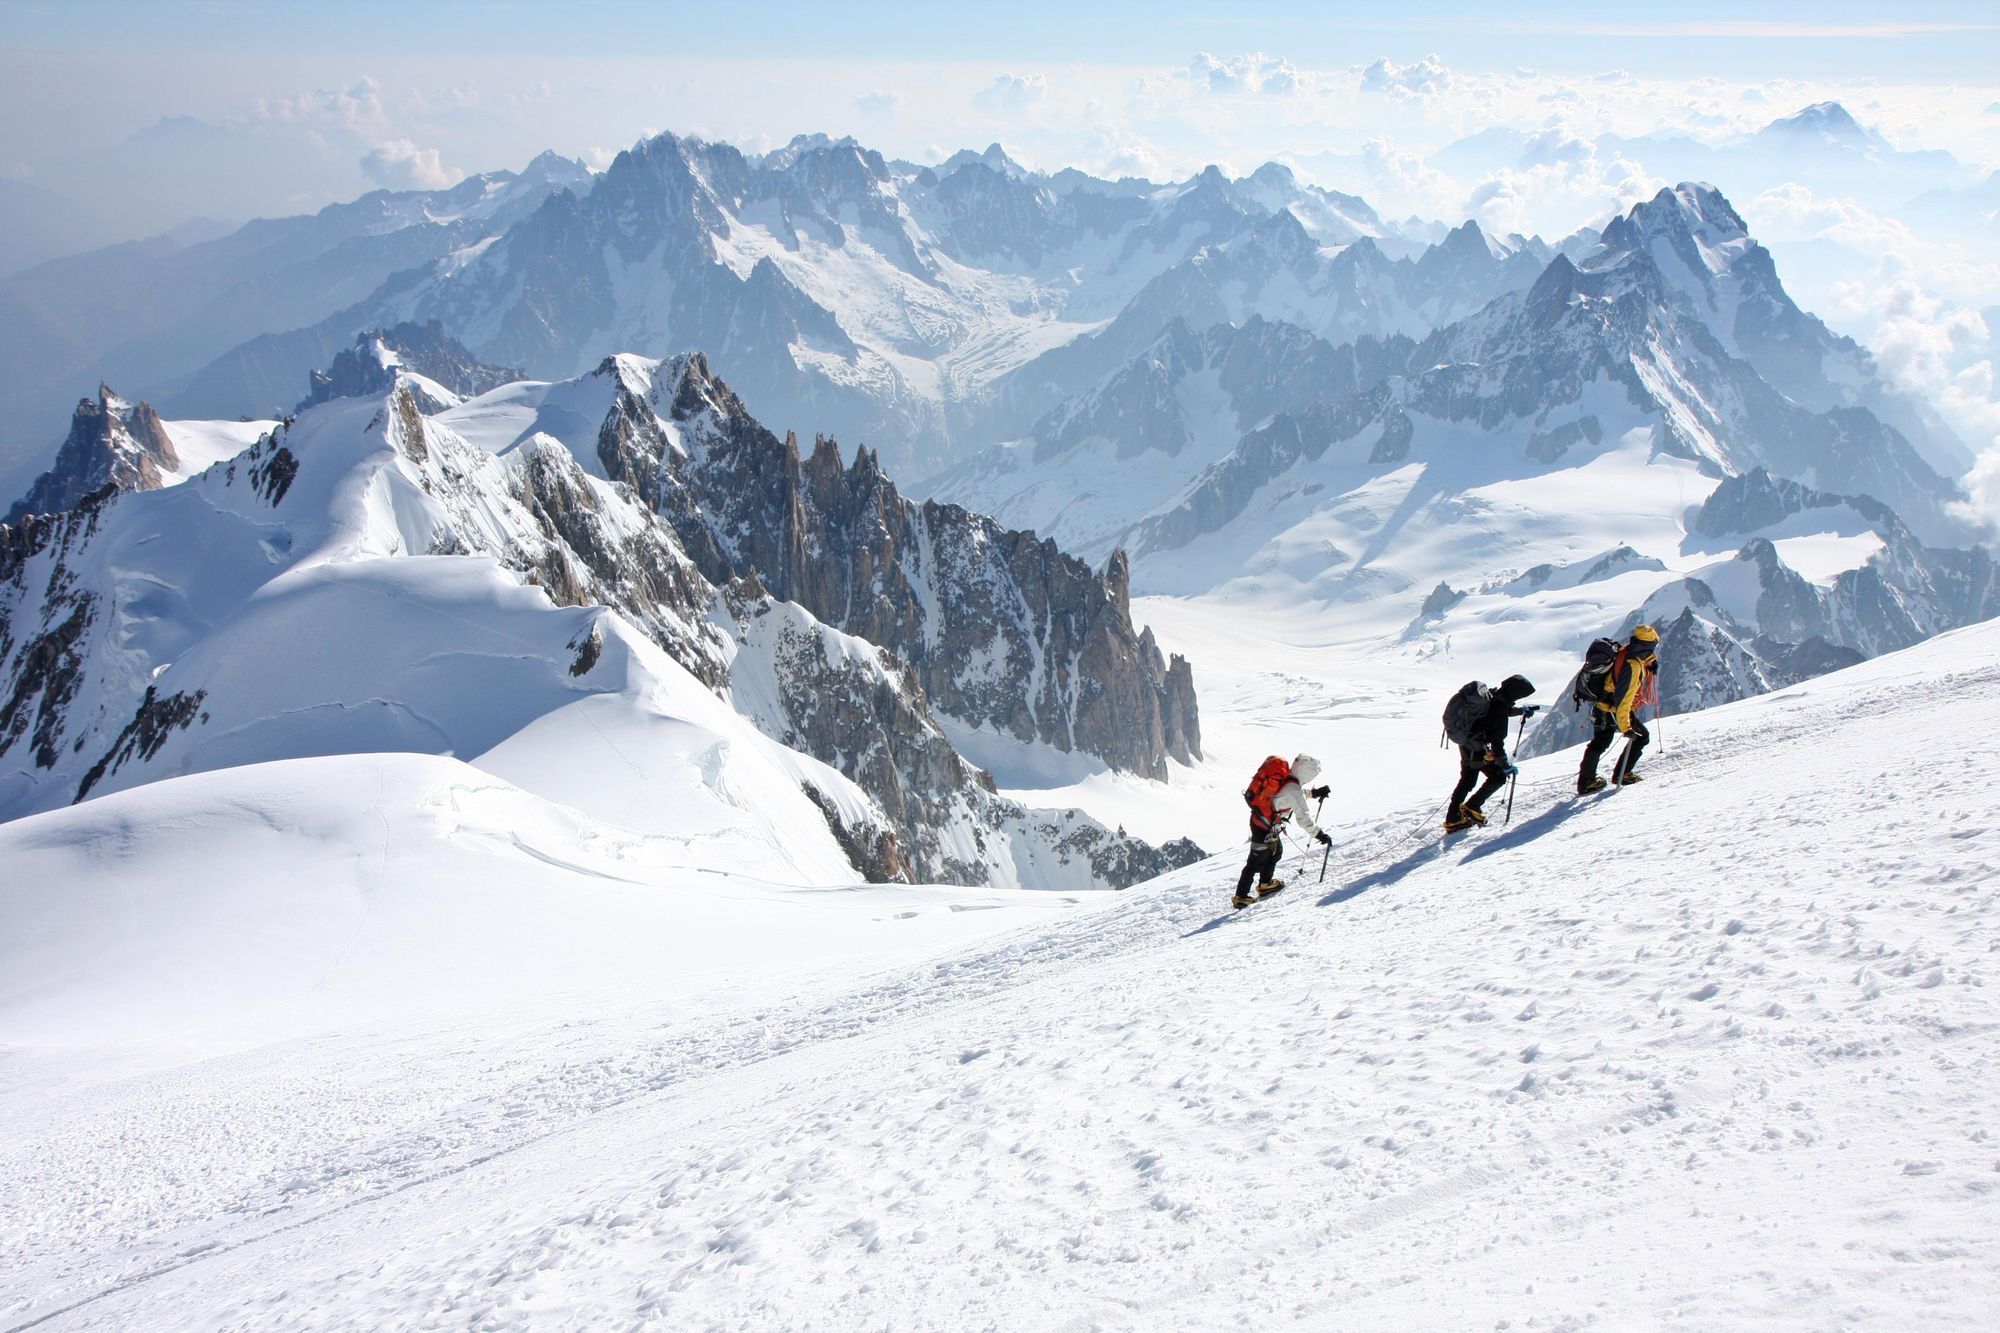 On the ascent of Mont Blanc, the highest mountain in France and western Europe. Photo: Altai France/Guillaume Besnard